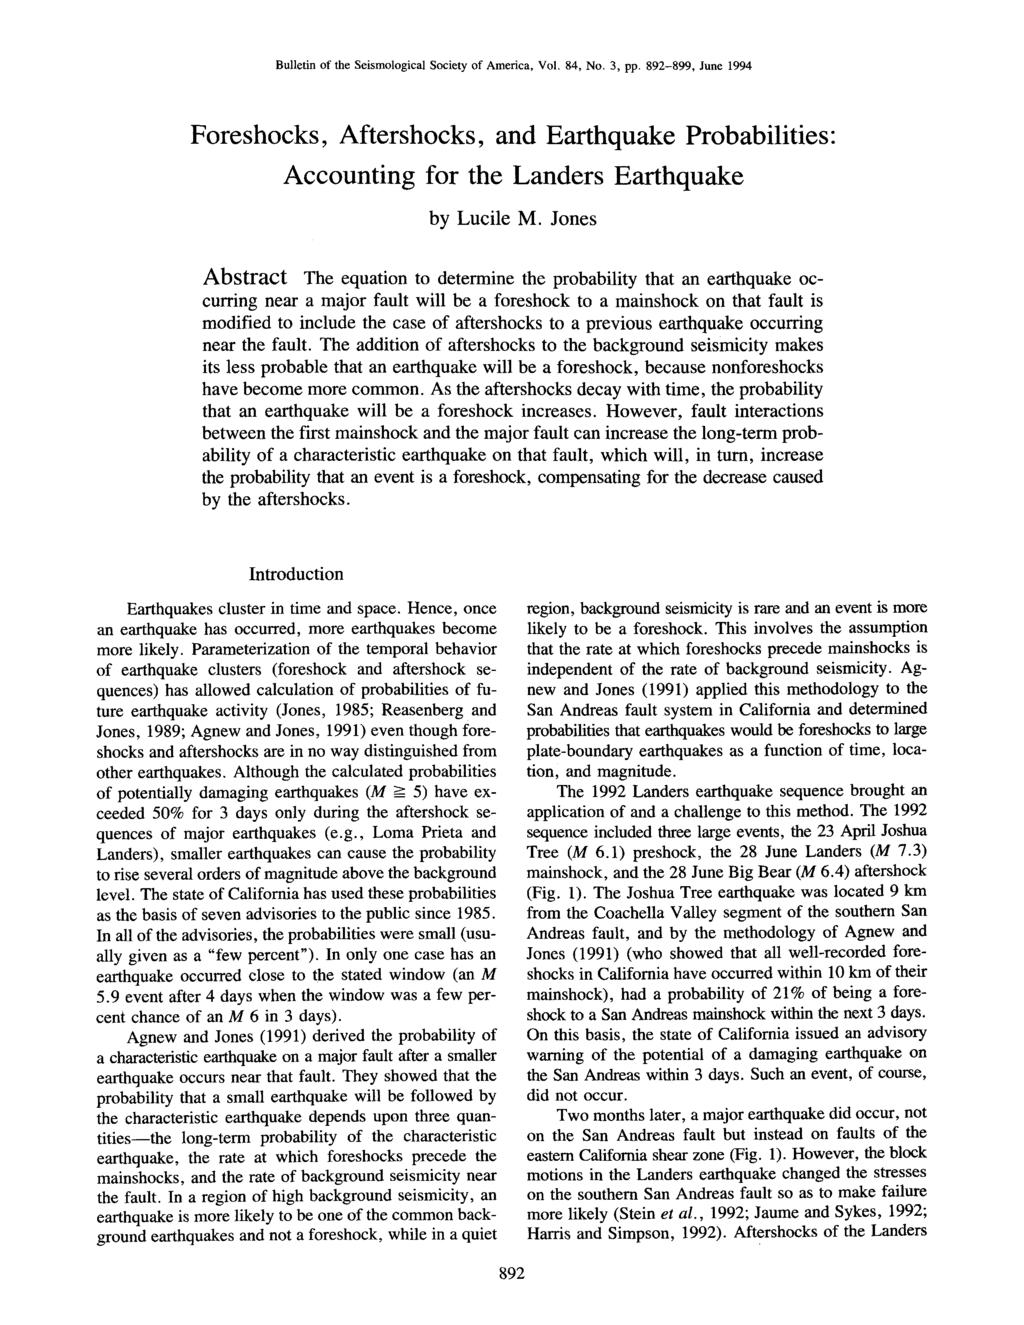 Bulletin of the Seismological Society of America, Vol. 84, No. 3, pp. 892-899, June 1994 Foreshocks, Aftershocks, and Earthquake Probabilities: Accounting for the Landers Earthquake by Lucile M.